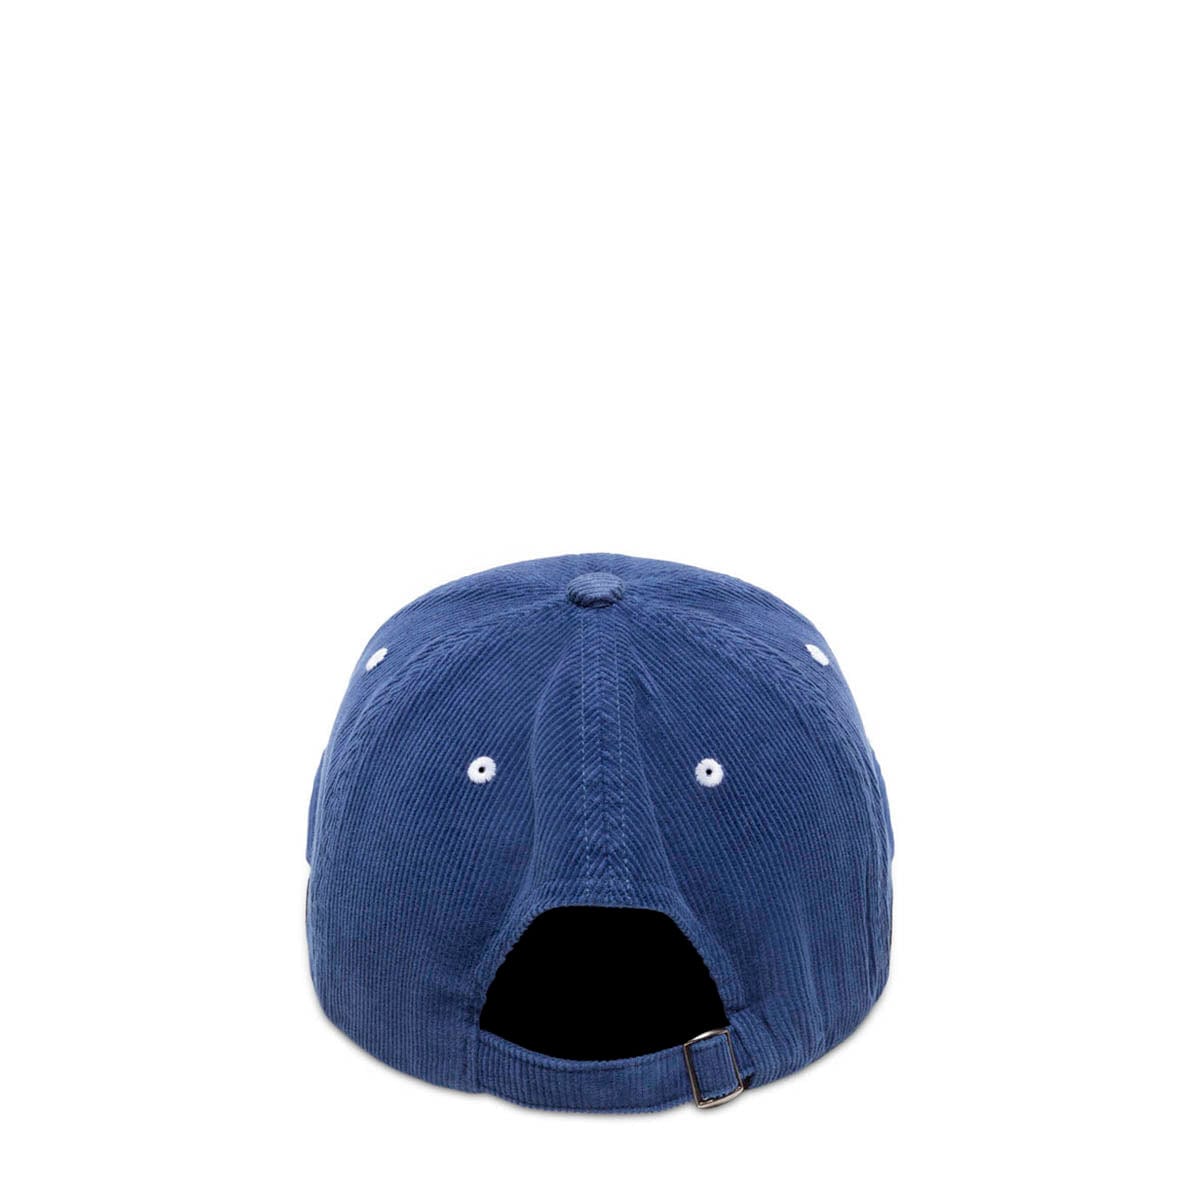 By Parra Headwear BLUE / O/S / 49155 ANXIOUS DOG 6 PANEL HAT